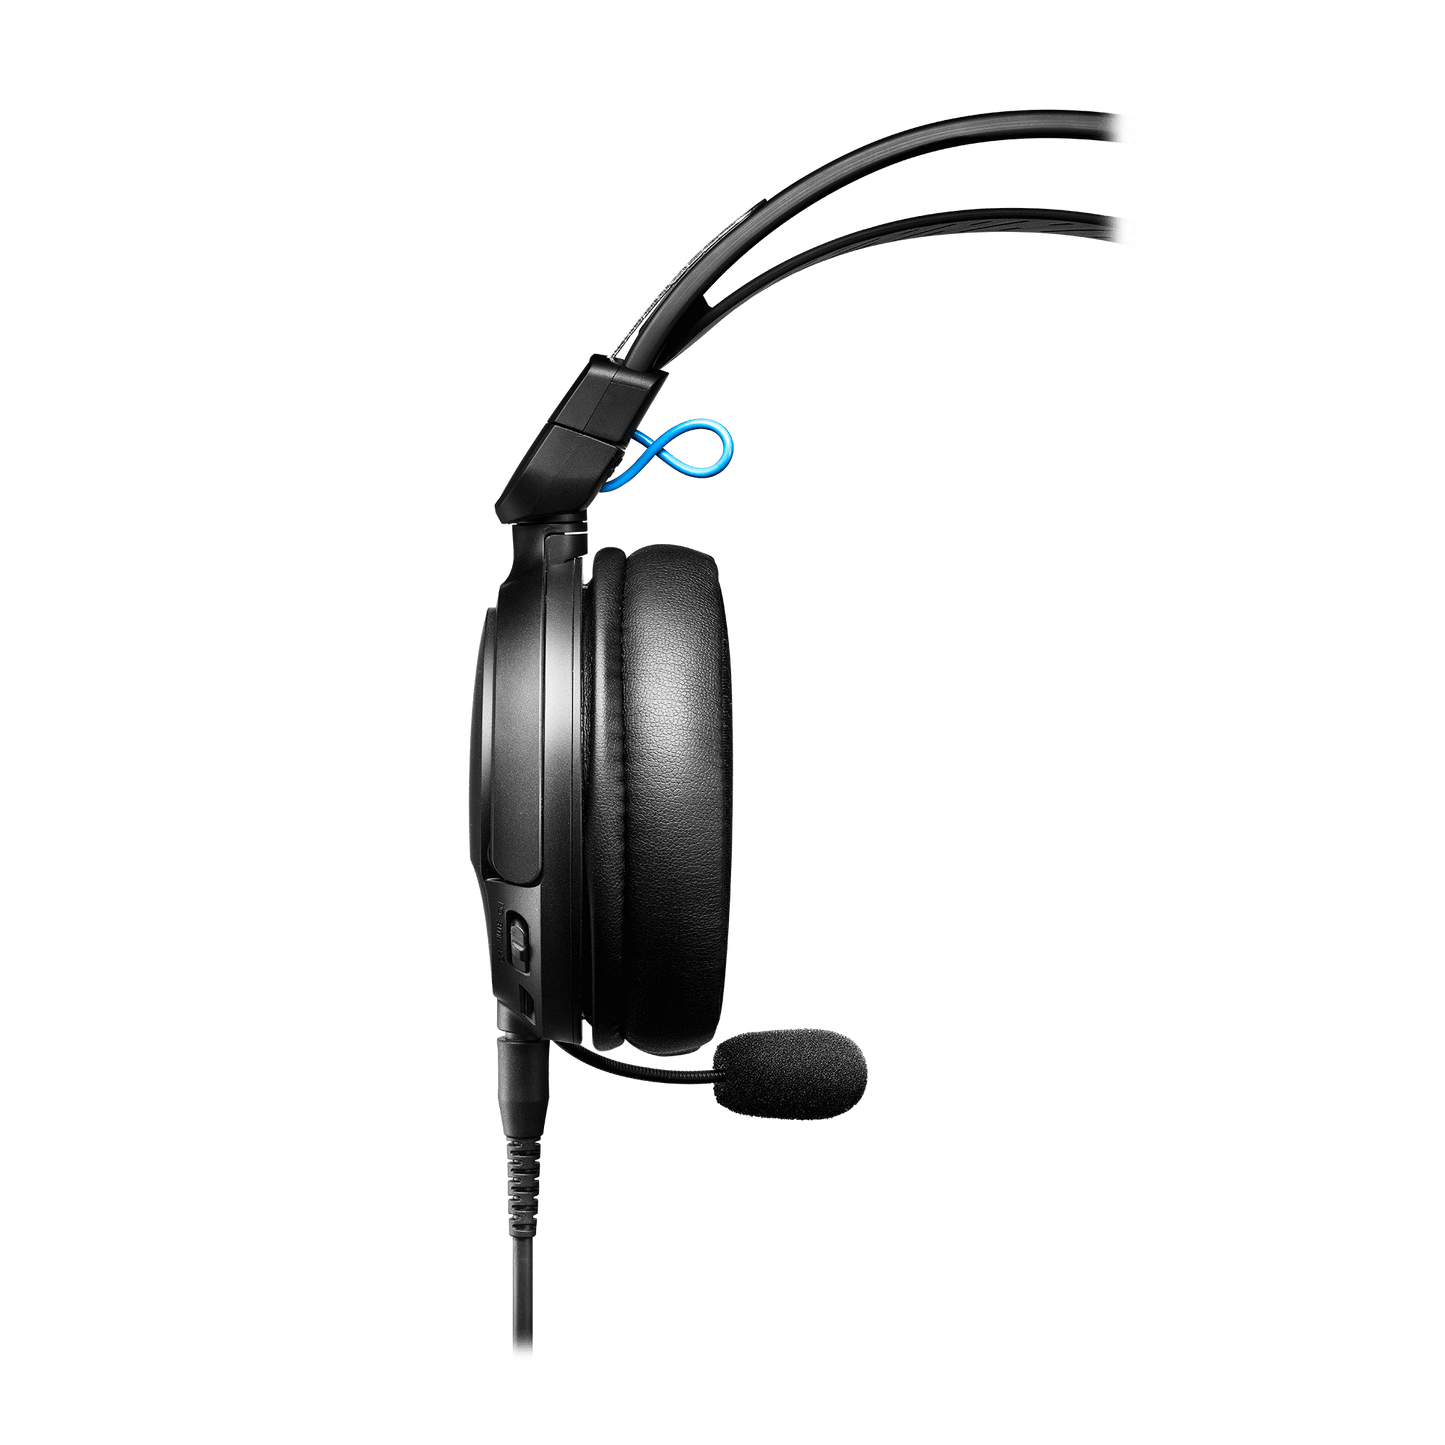 Audio-Technica ATH-GL3 Closed-Back Gaming Headset